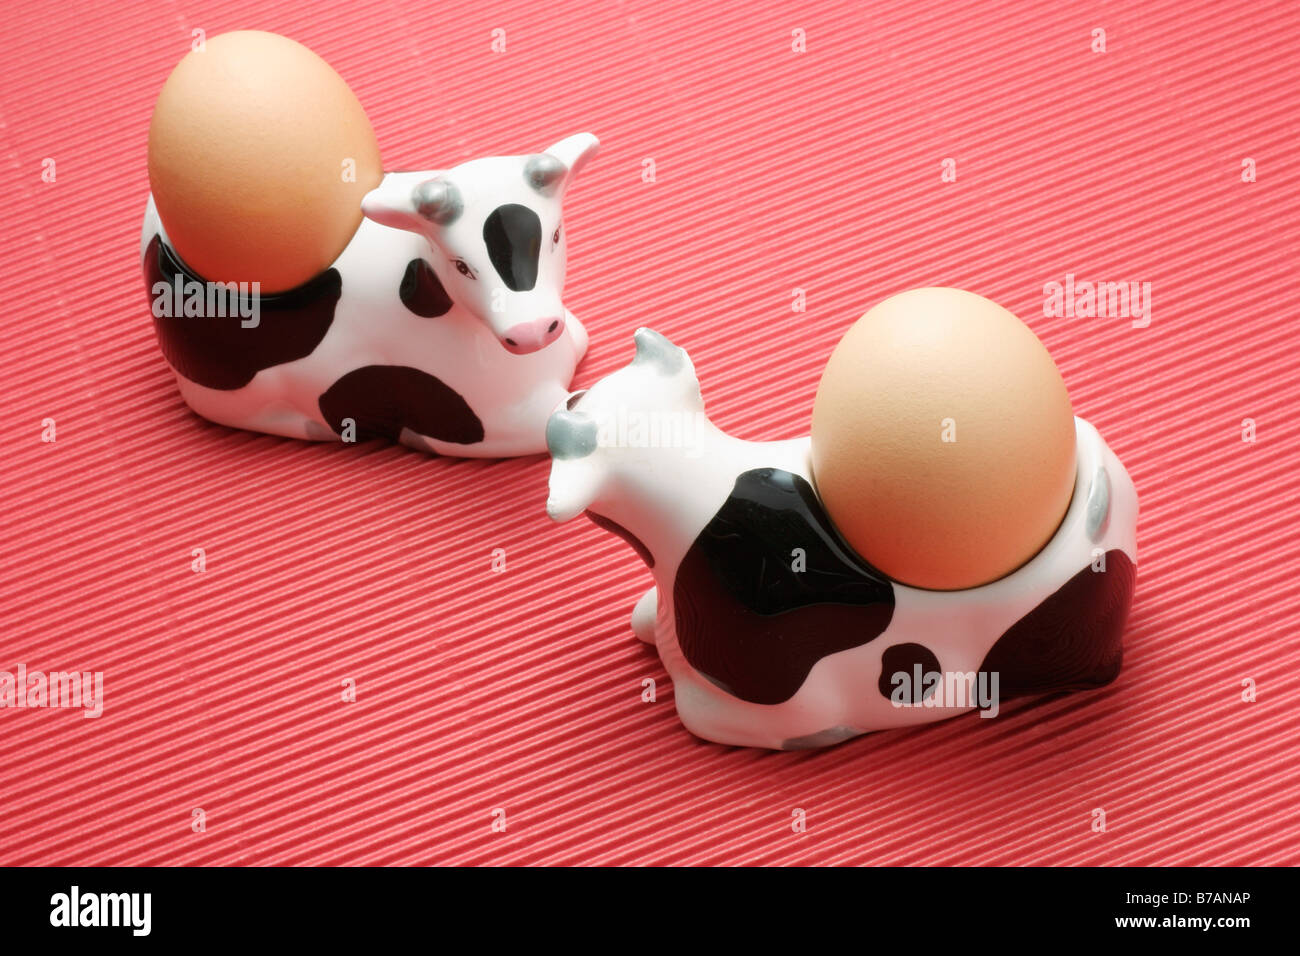 Cow-shape egg cups Stock Photo